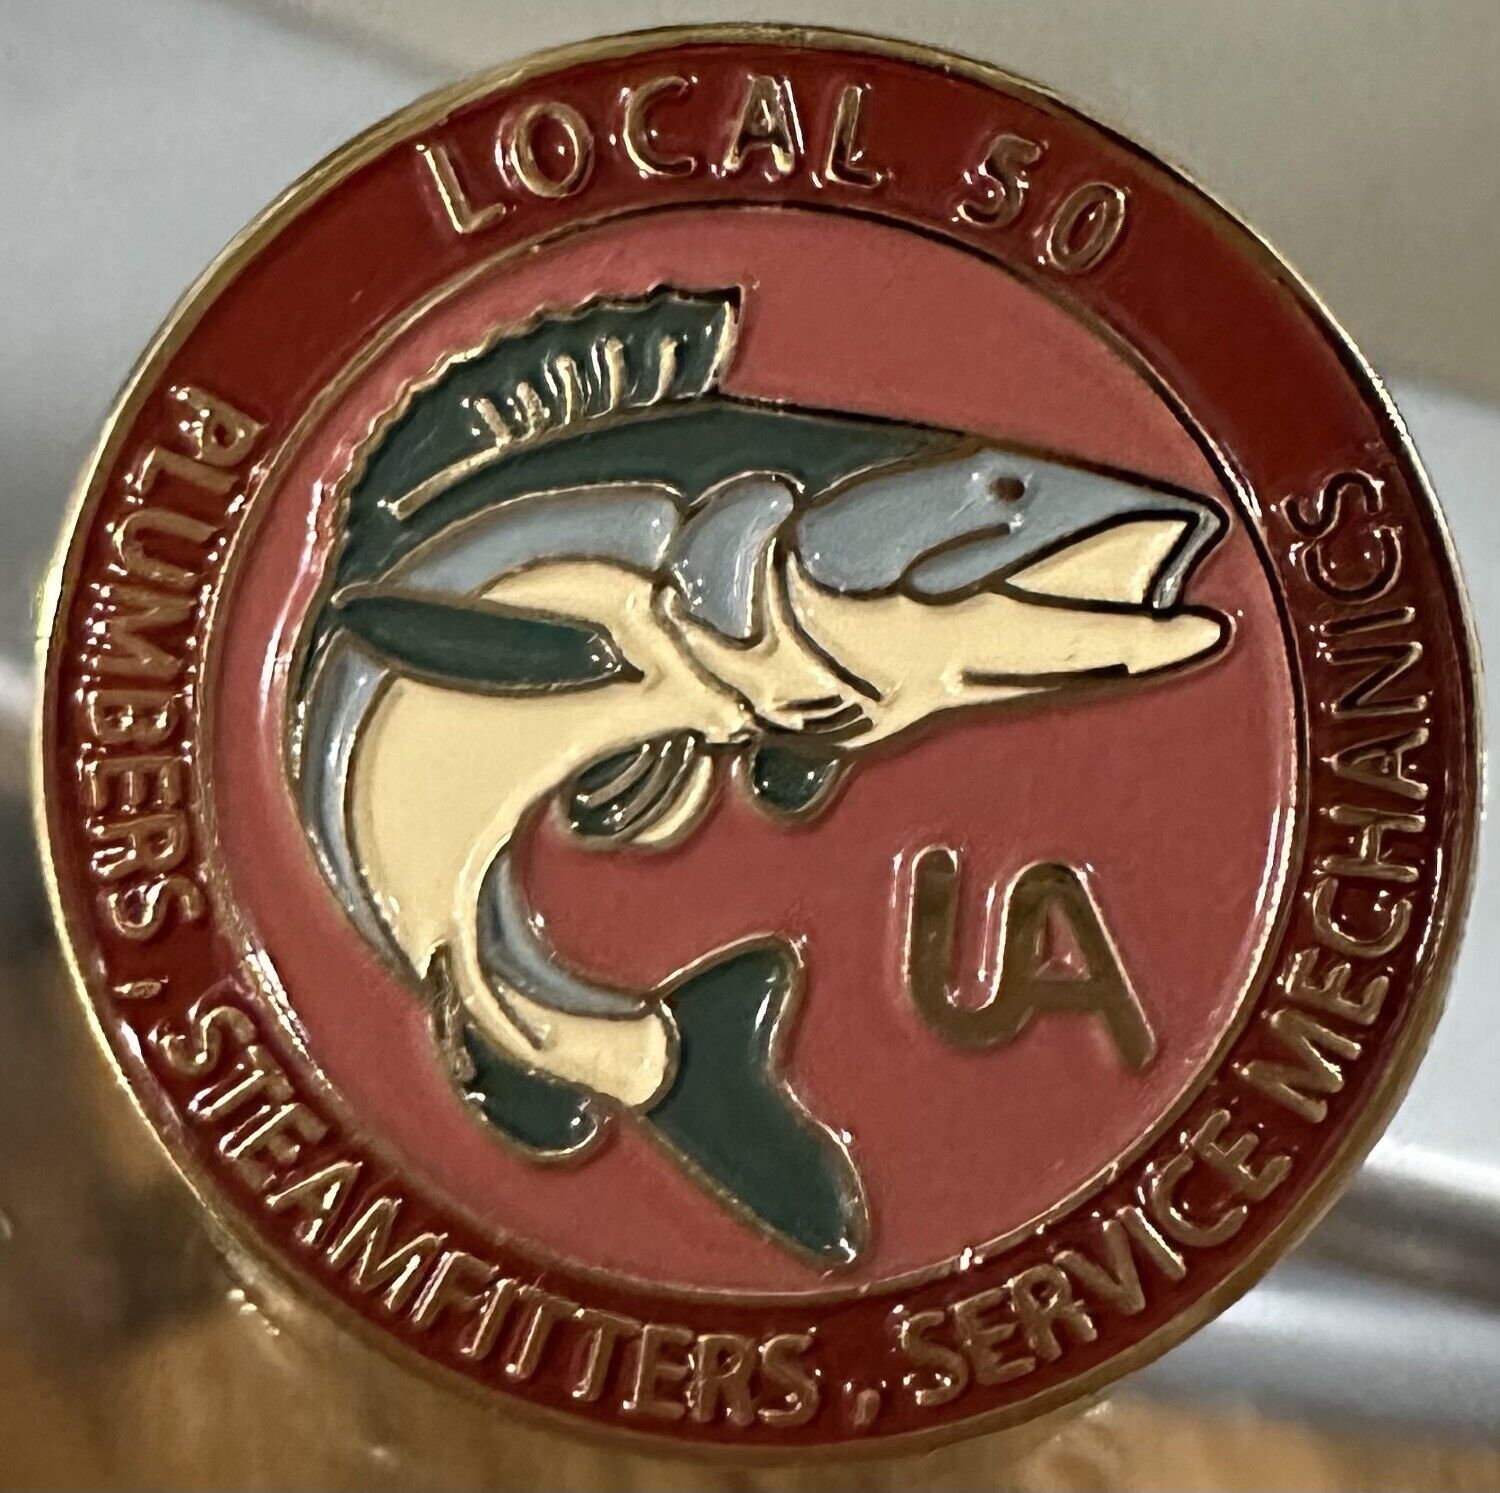 UA PLUMBERS PIPEFITTERS STEAMFITTERS UNION LOCAL 50 PIN